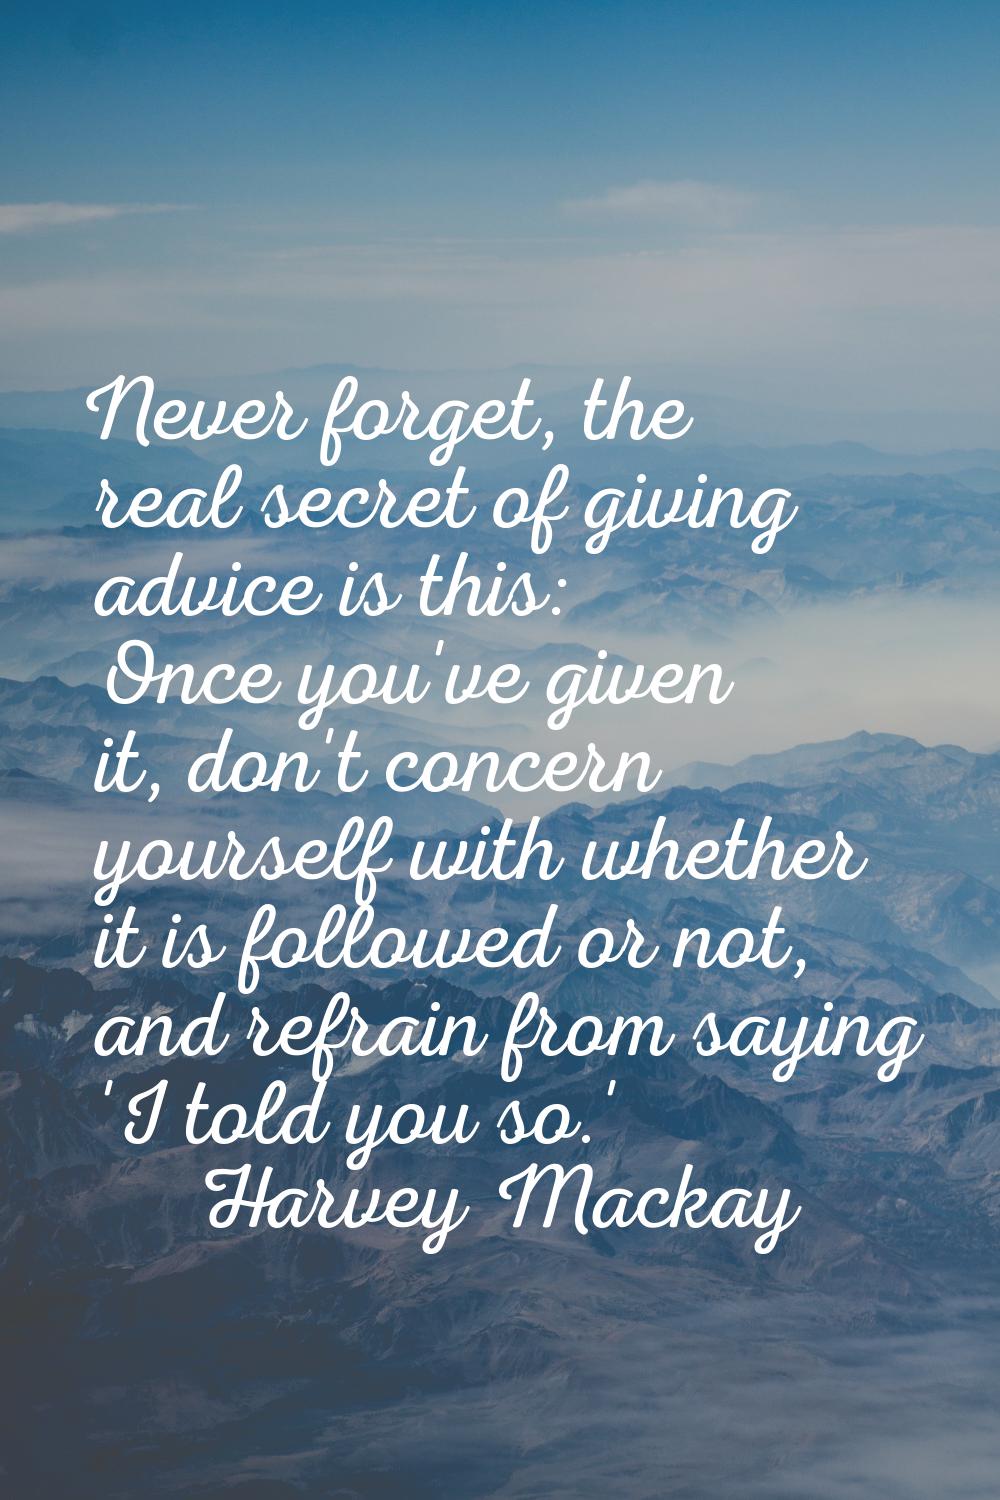 Never forget, the real secret of giving advice is this: Once you've given it, don't concern yoursel